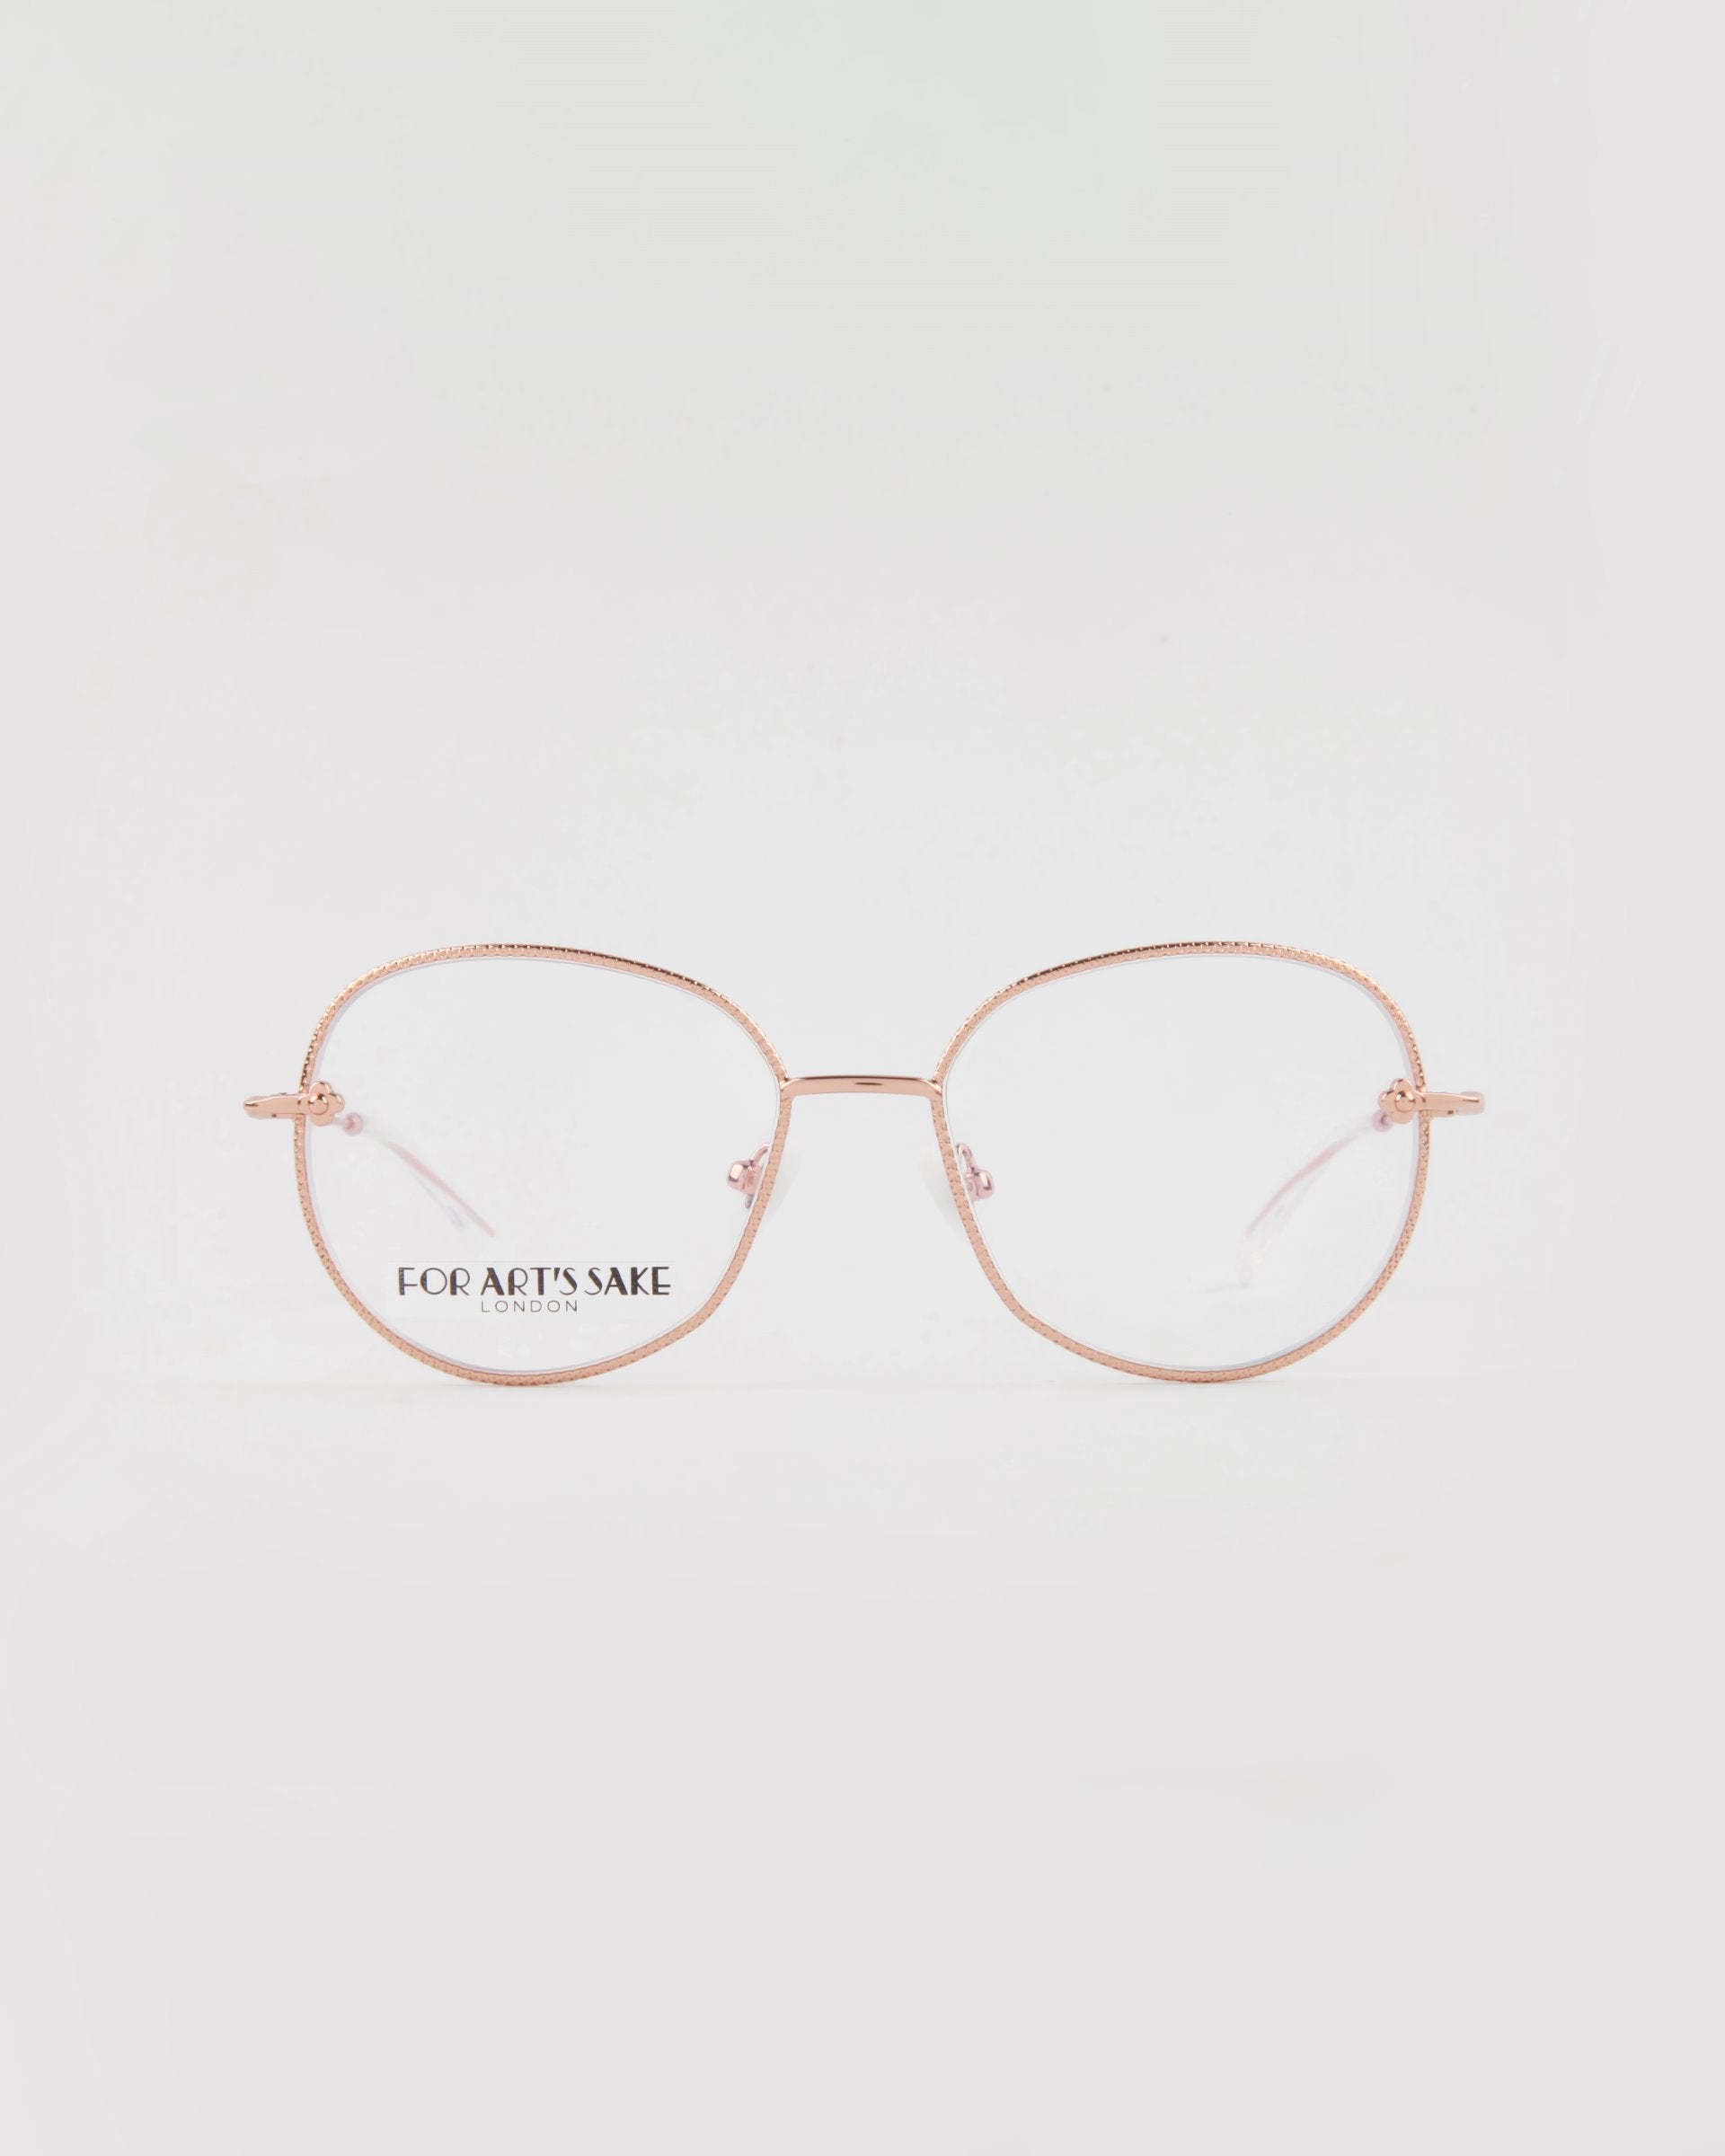 A pair of gold-plated stainless steel eyeglasses with round clear lenses. The glasses have thin gold temples and a lightweight design. The brand name "For Art's Sake®" and "LONDON" are printed on the left lens. This handmade Jasmine eyewear features a white, clean background for showcasing elegance.